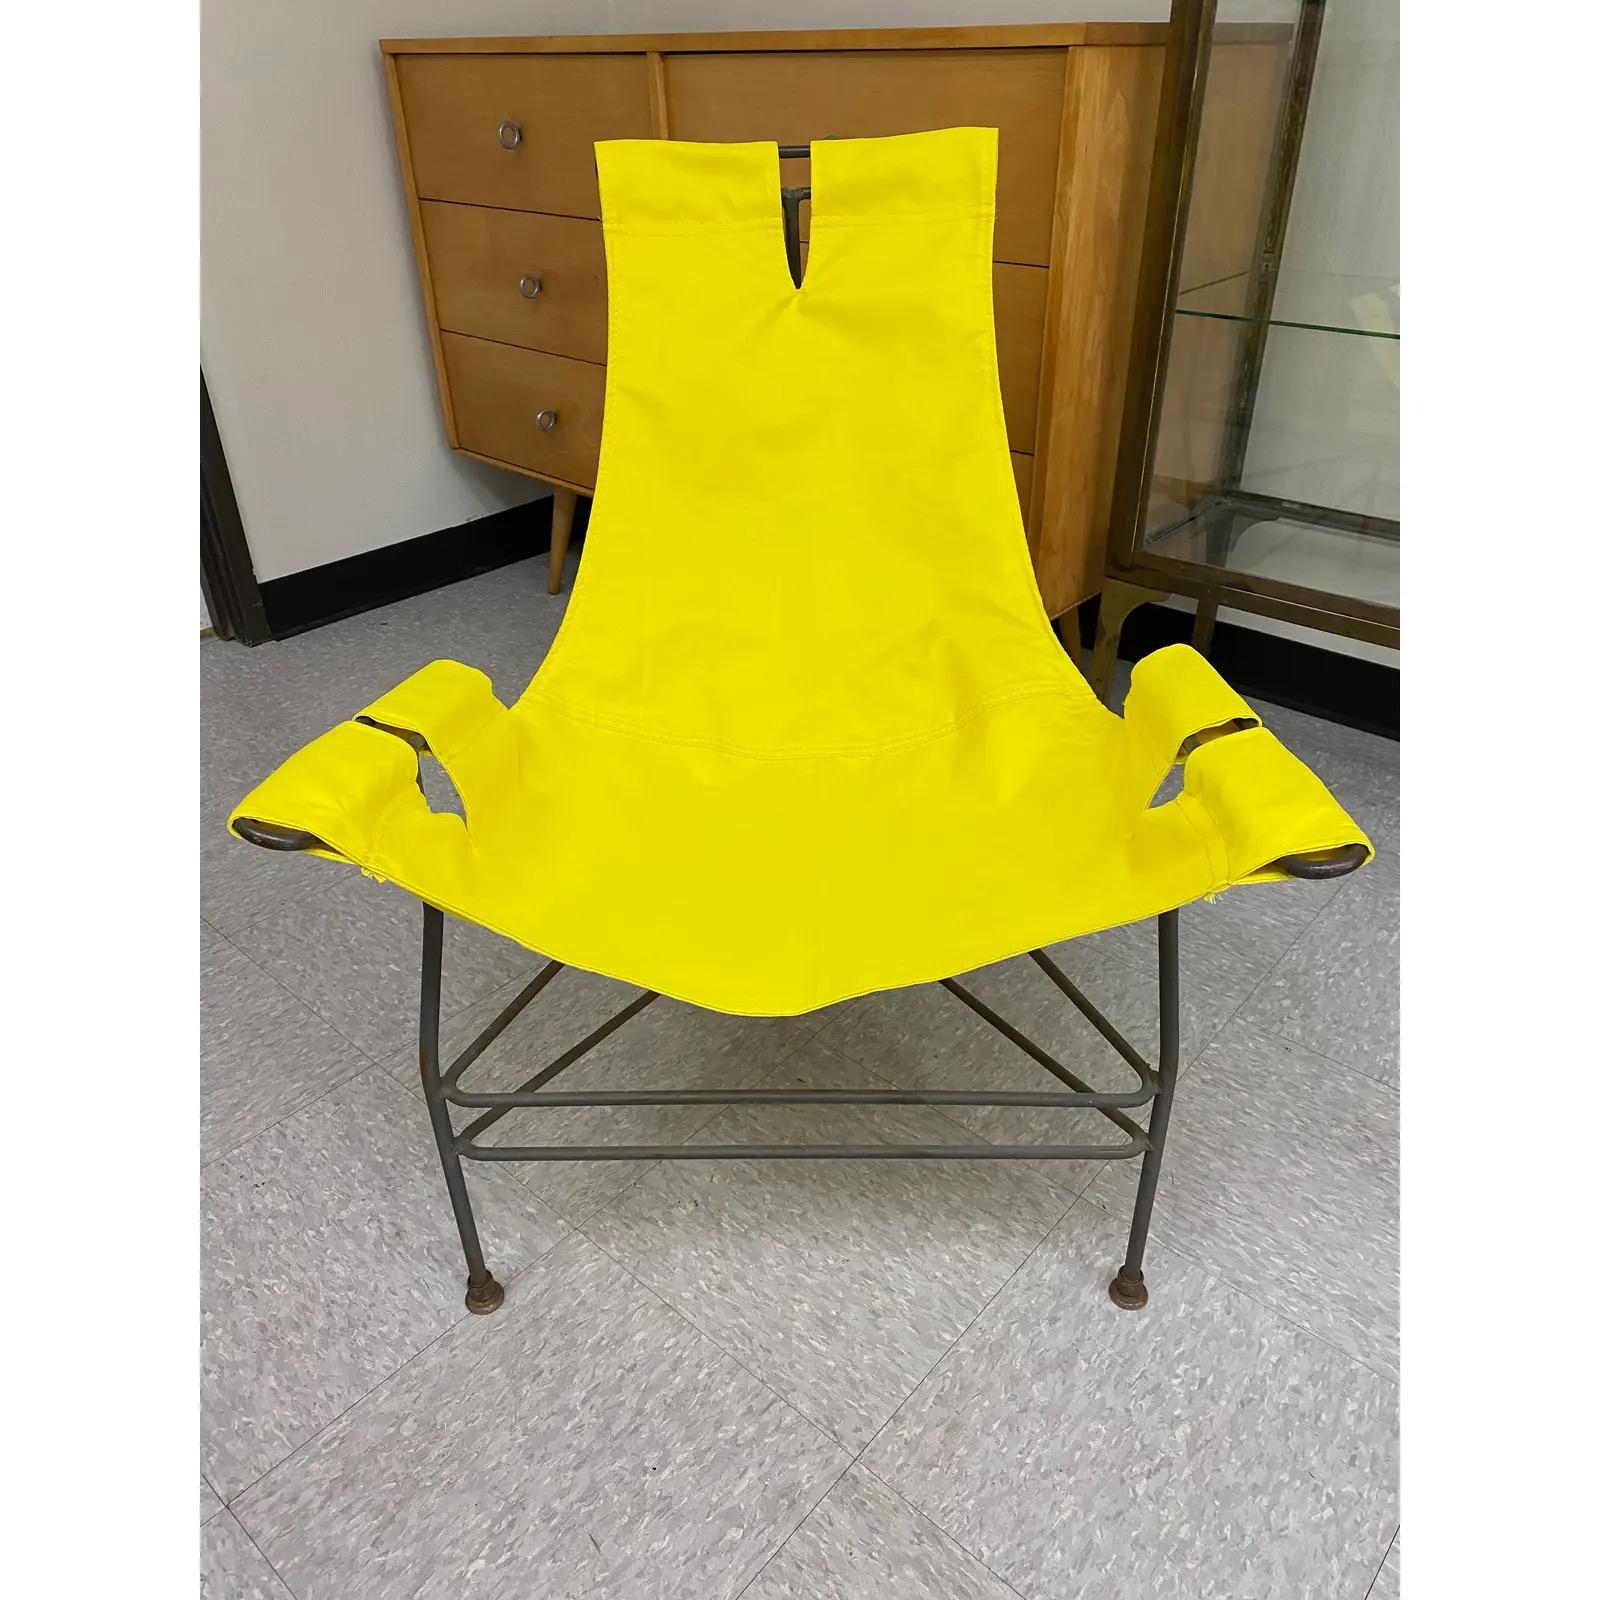 Newly upholstered in sunshine yellow canvas, slung onto original iron frames designed by Jerry Johnson for Leathercraft in 1954.

Original finish remains to frames with natural patina. We love to mix old and new, allowing the piece to refer to its